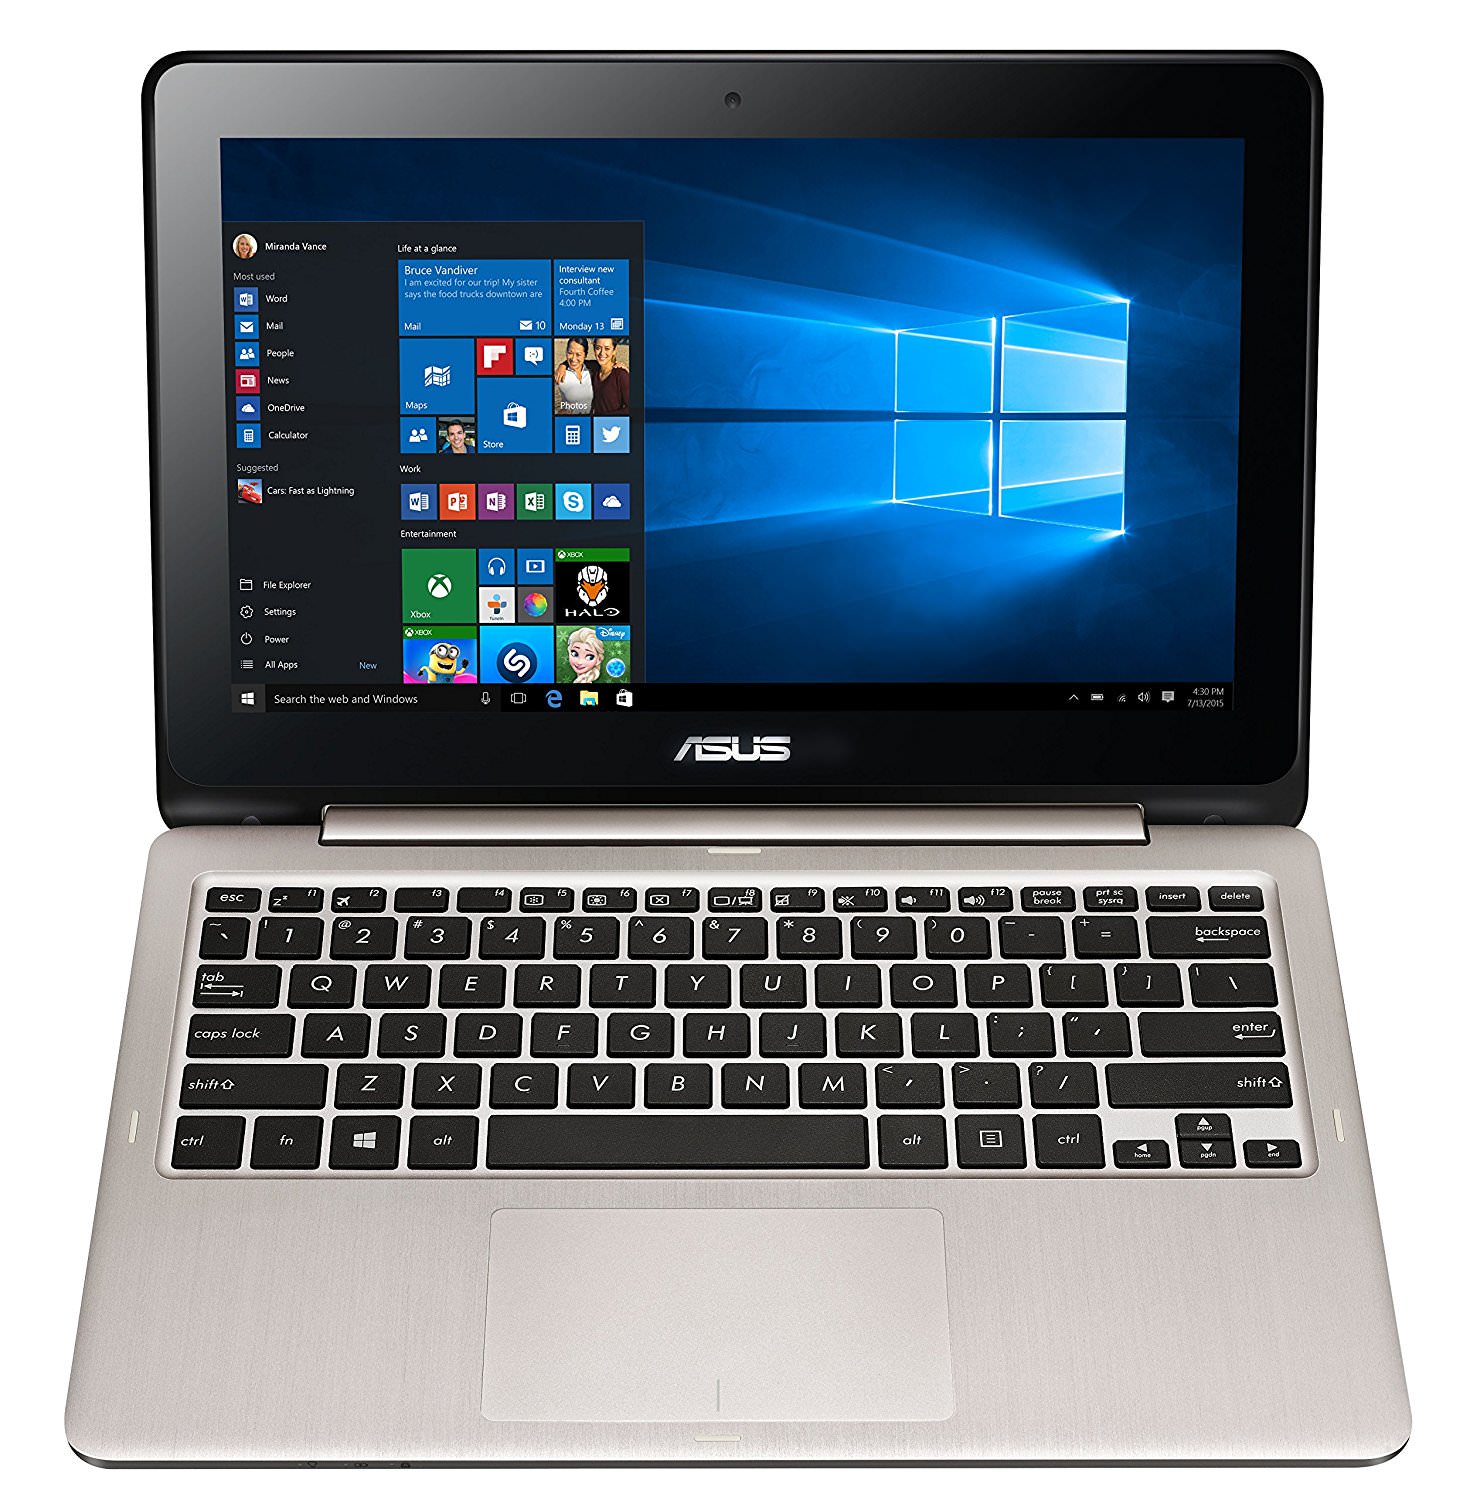 ASUS VivoBook Flip TP200SA-DH01T 11.6 inch display Thin and Lightweight 2-in-1 HD Touchscreen Laptop, Intel Celeron 2.48 GHz Processor, 4GB RAM, 32GB EMMC Storage, Windows 10 Home - image 1 of 3